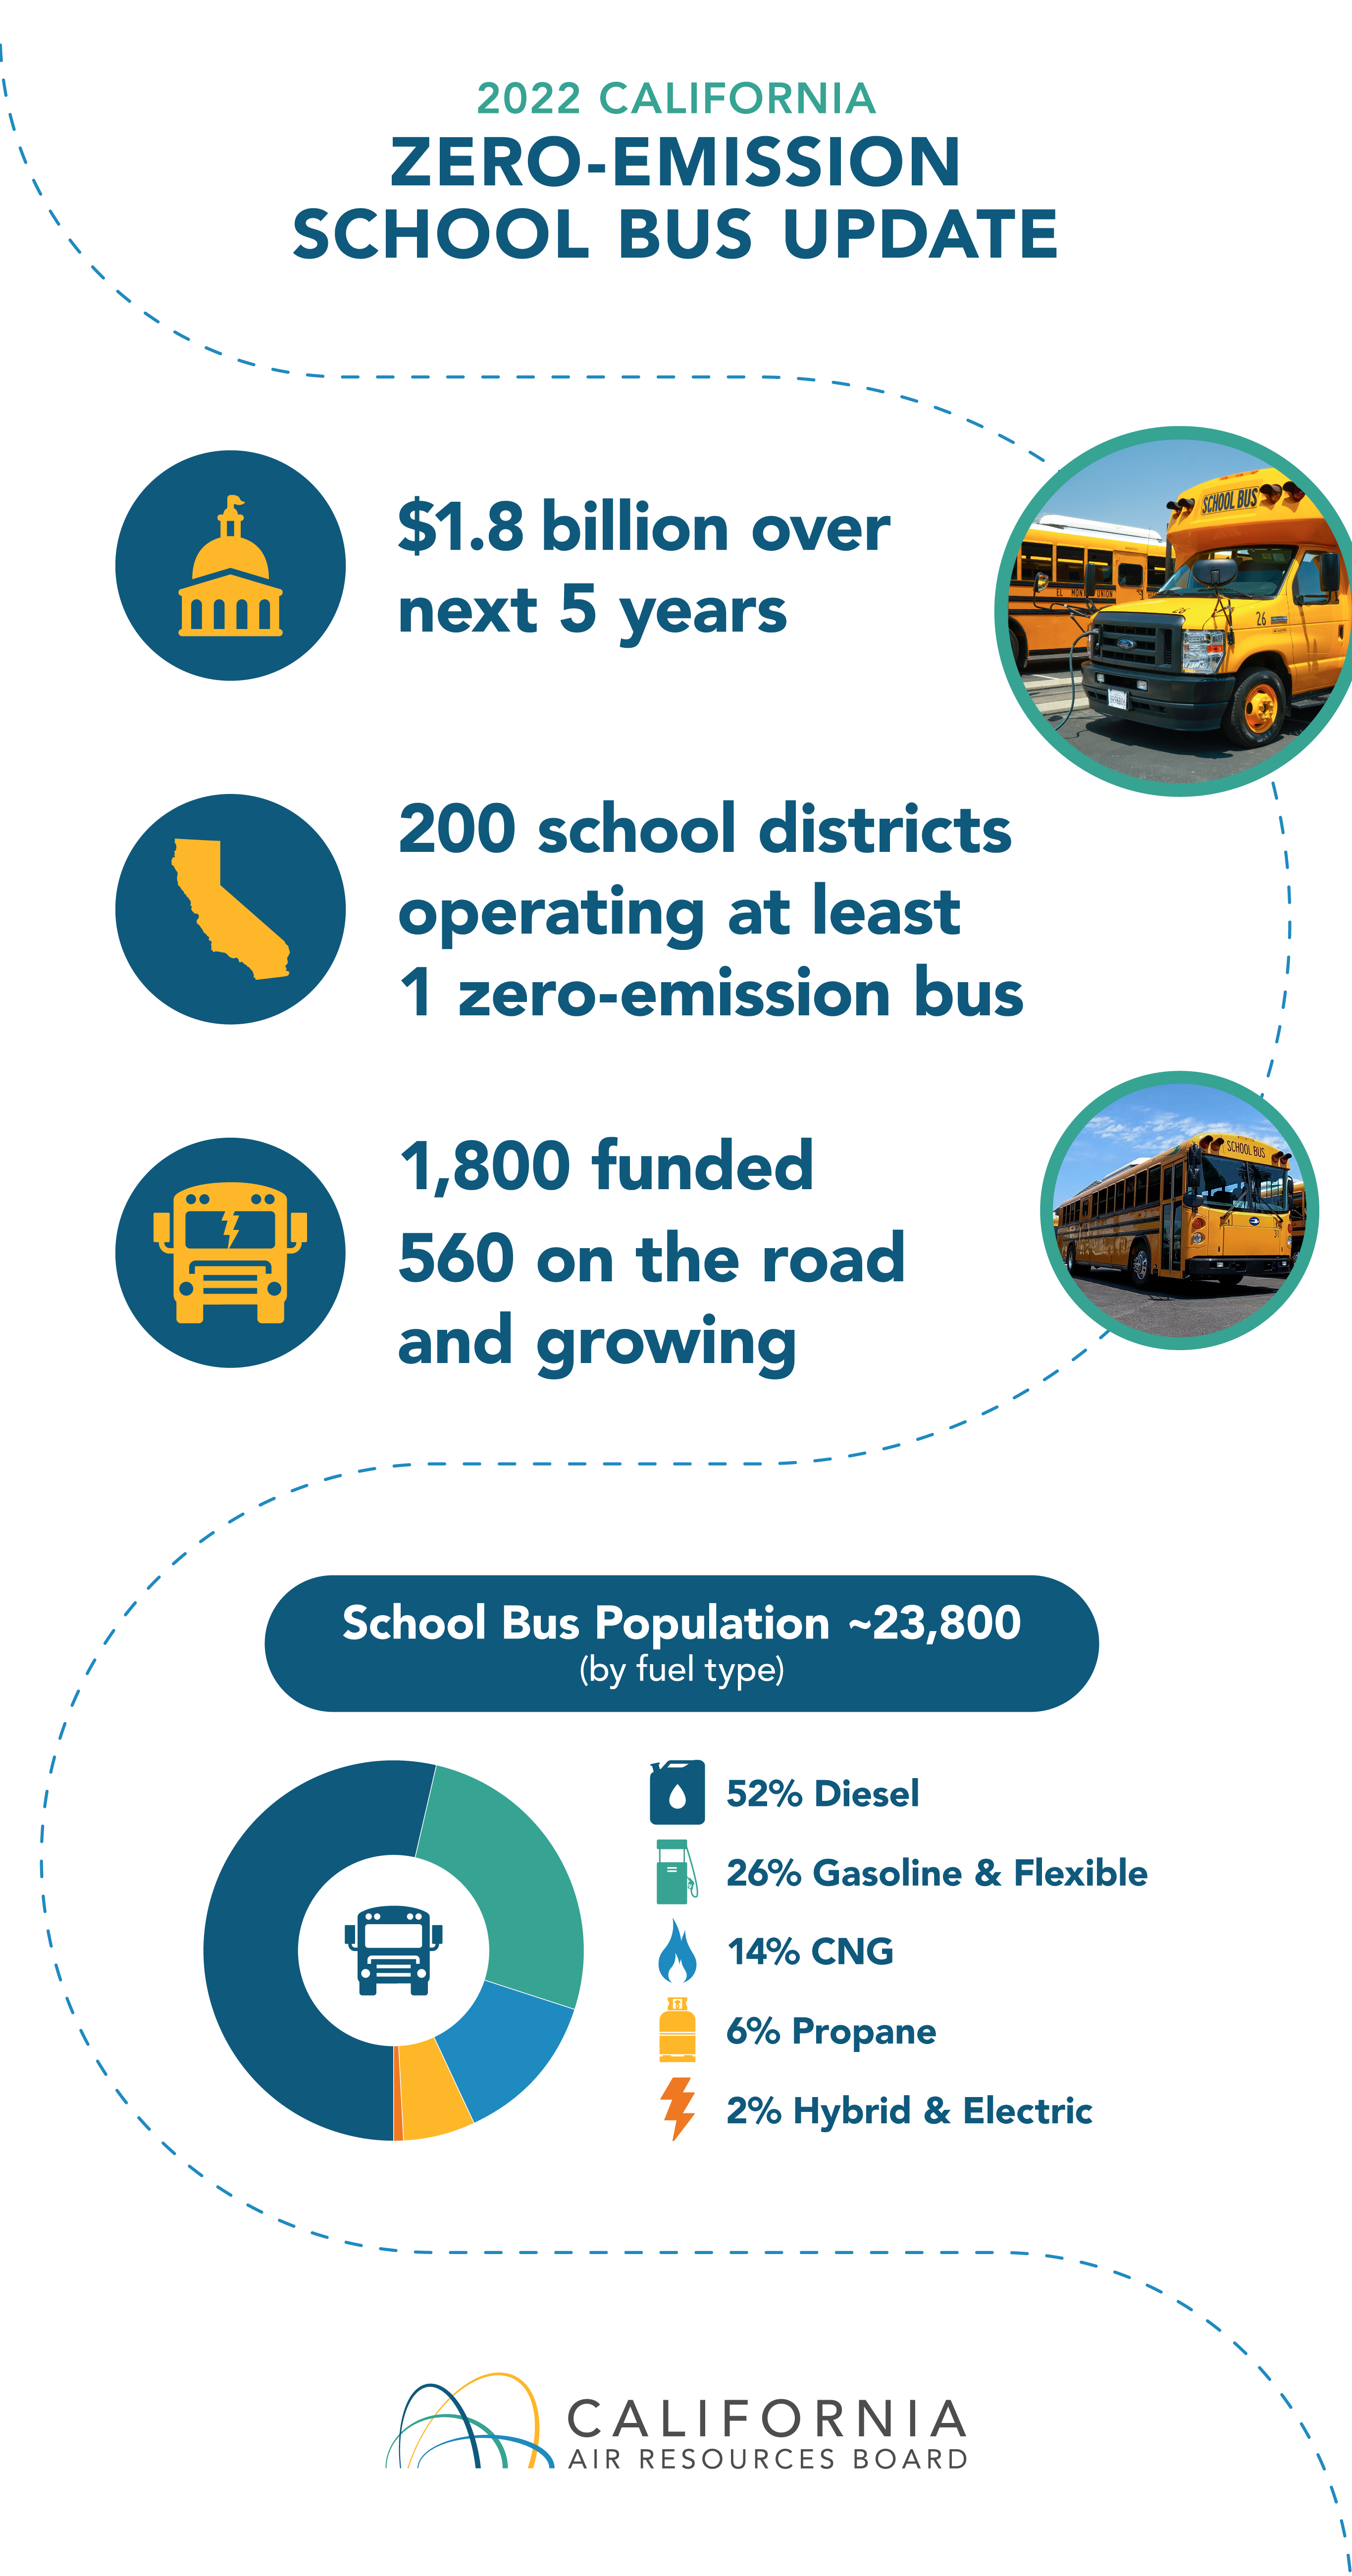 Infographic summarizing 2022 school bus incentives and deployments